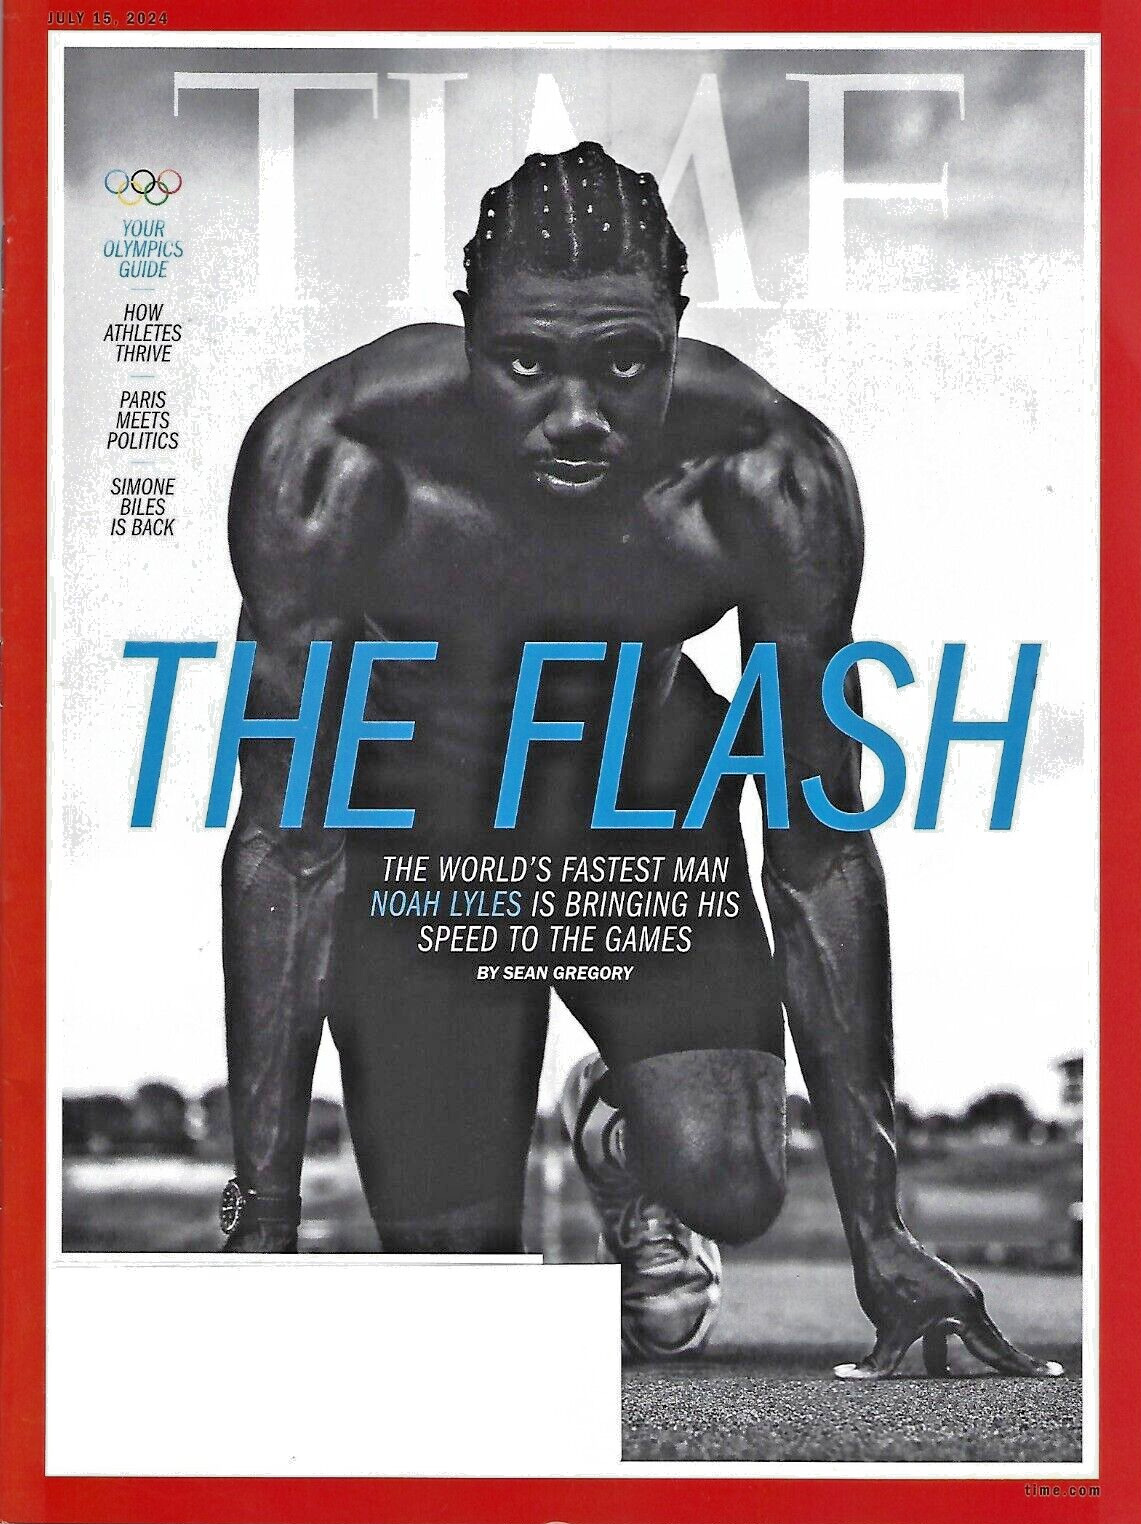 TIME MAGAZINE-JULY 15, 2024-THE FLASH-NOAH LYLES--OLYMPICS GUIDE-Brand New